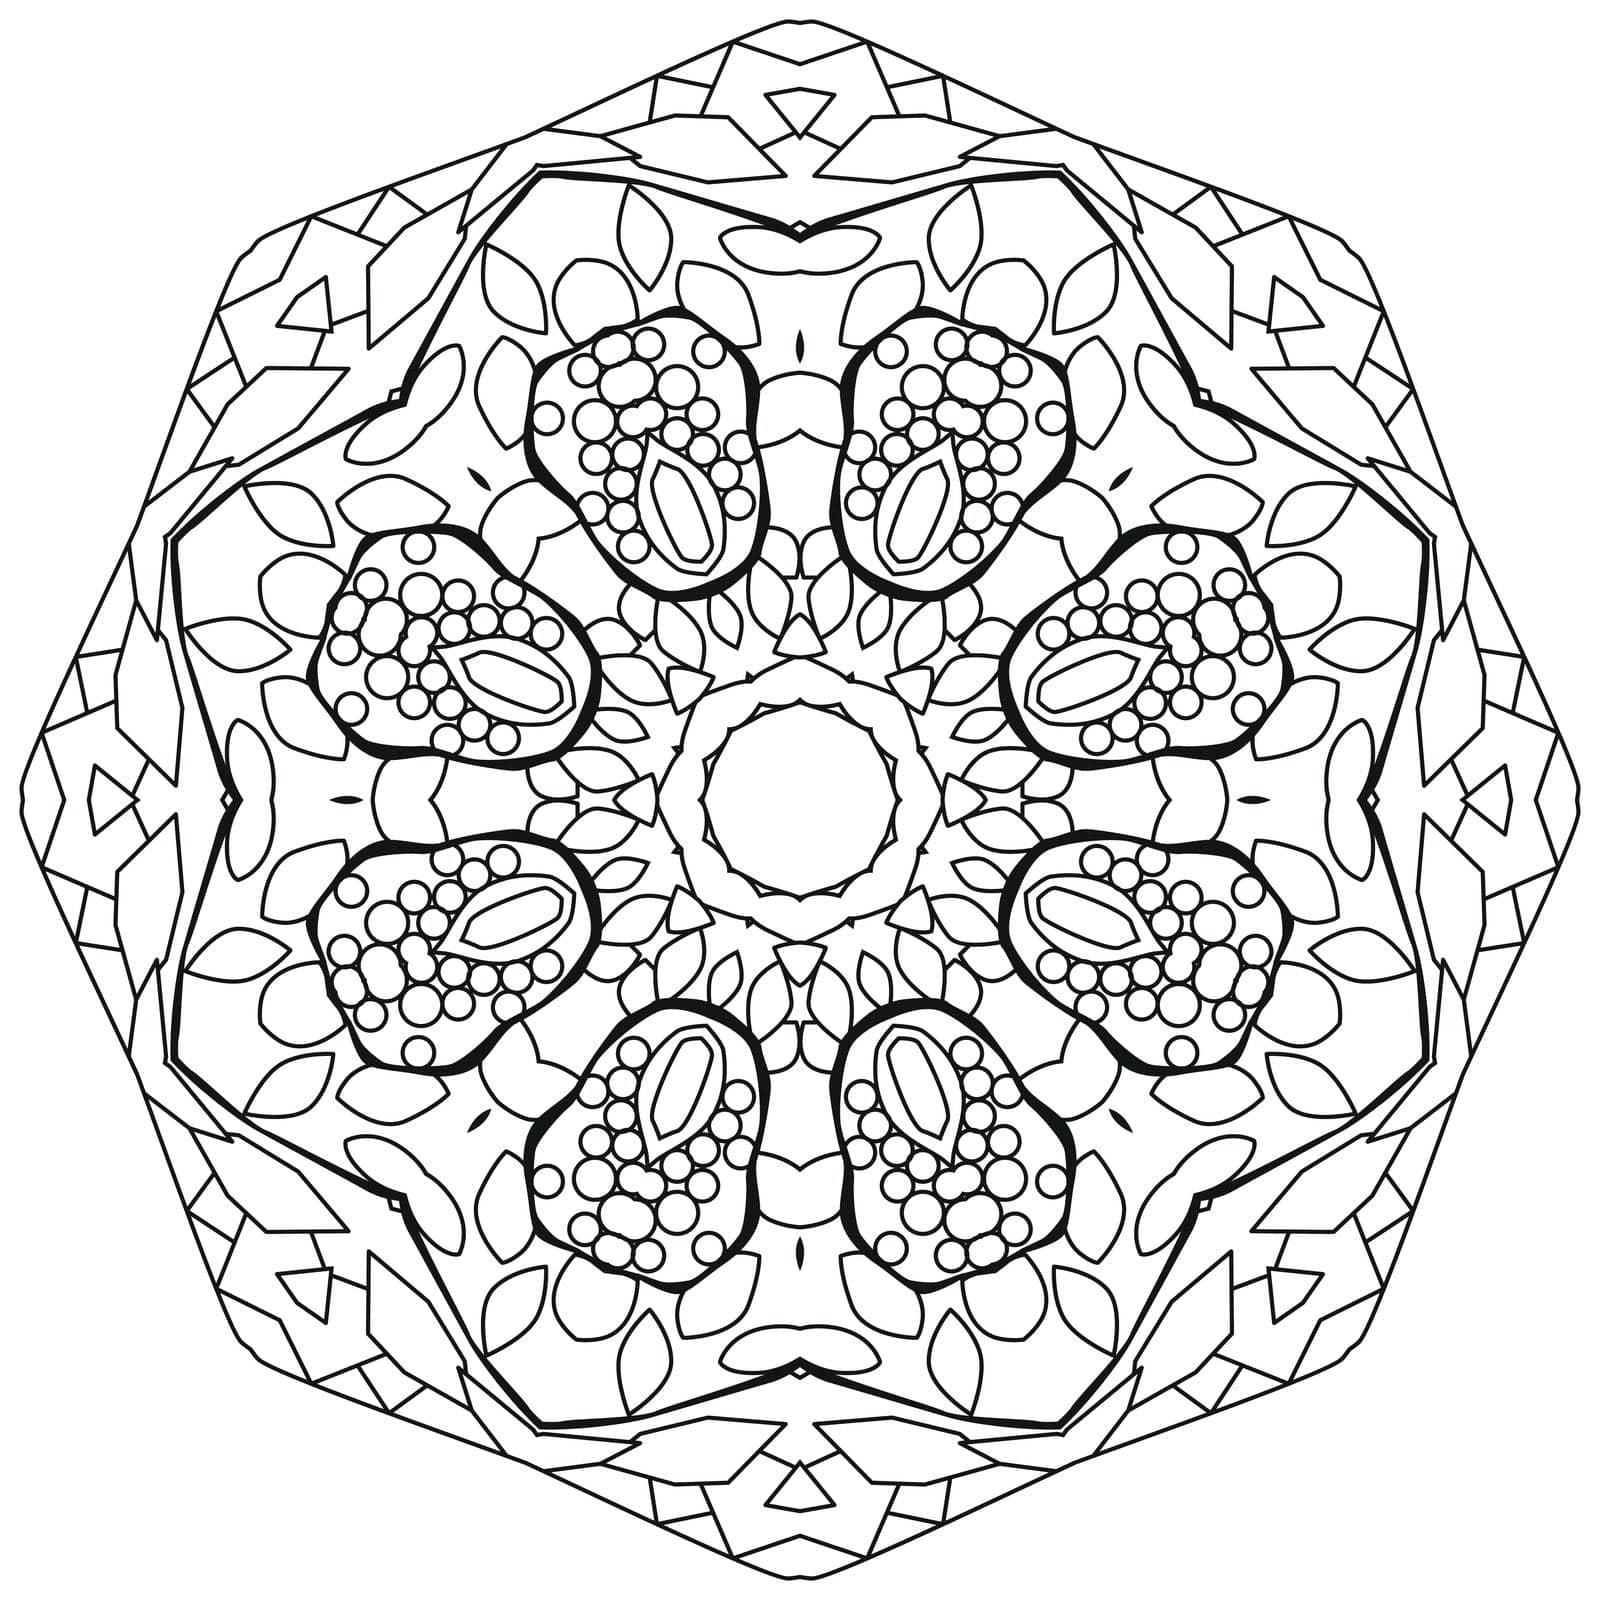 Decorative round ornaments. Unusual flower shape. Oriental vector, Anti-stress therapy patterns. Weave design elements for coloring.